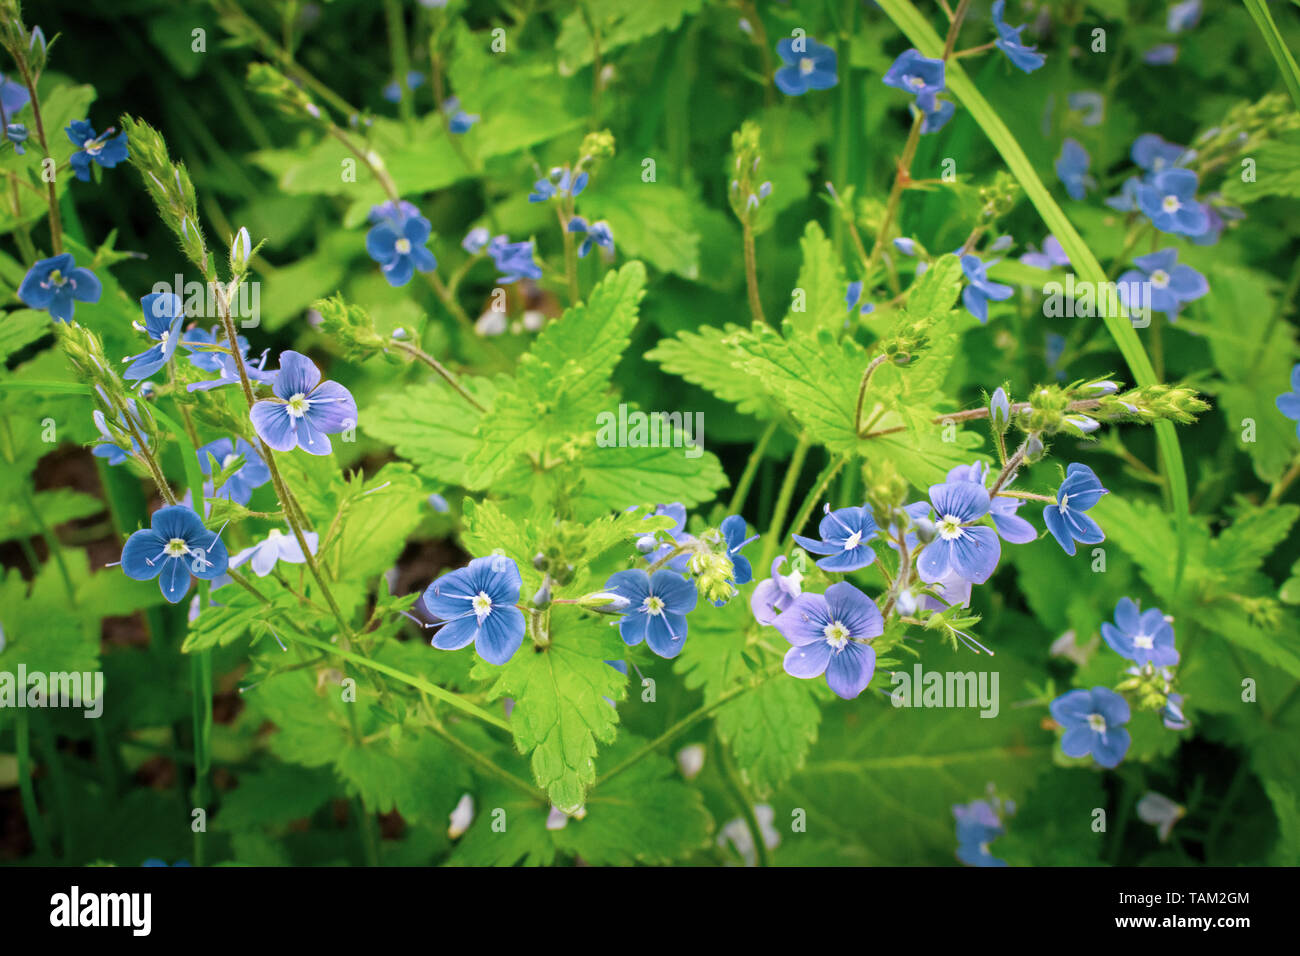 Wild violet flowers growing in the forest on a sunny springtime day Stock Photo